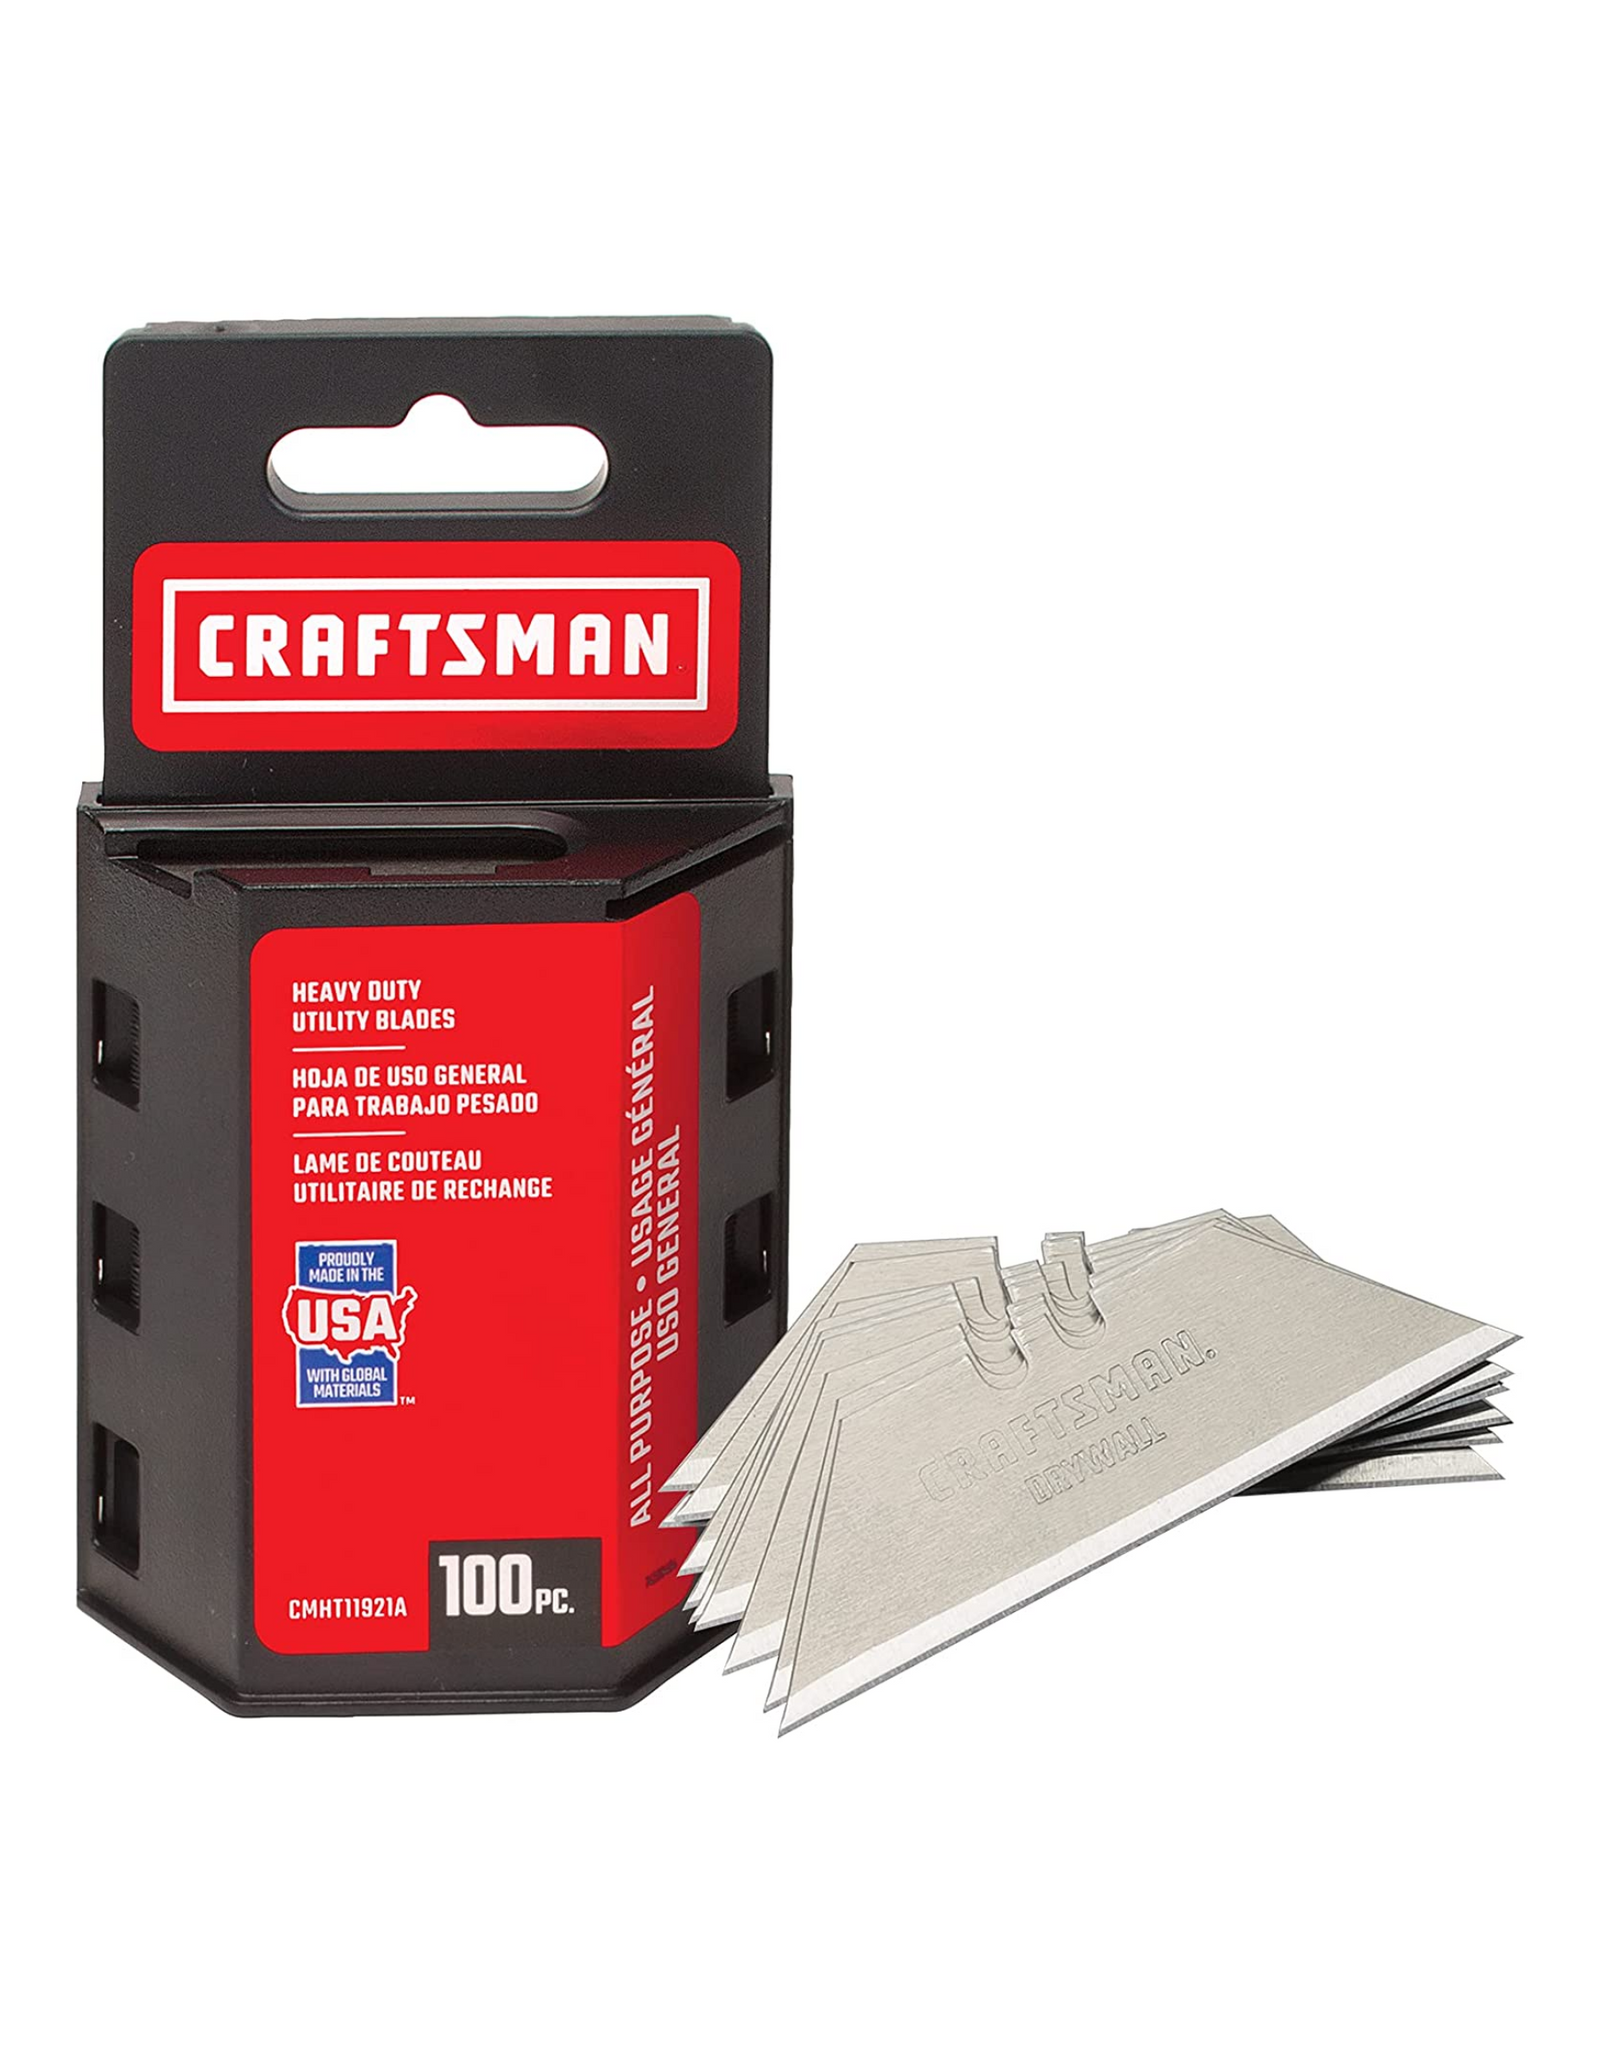 CRAFTSMAN Utility Knife Blades (CMHT11921A), Heavy Duty, 100 Pack